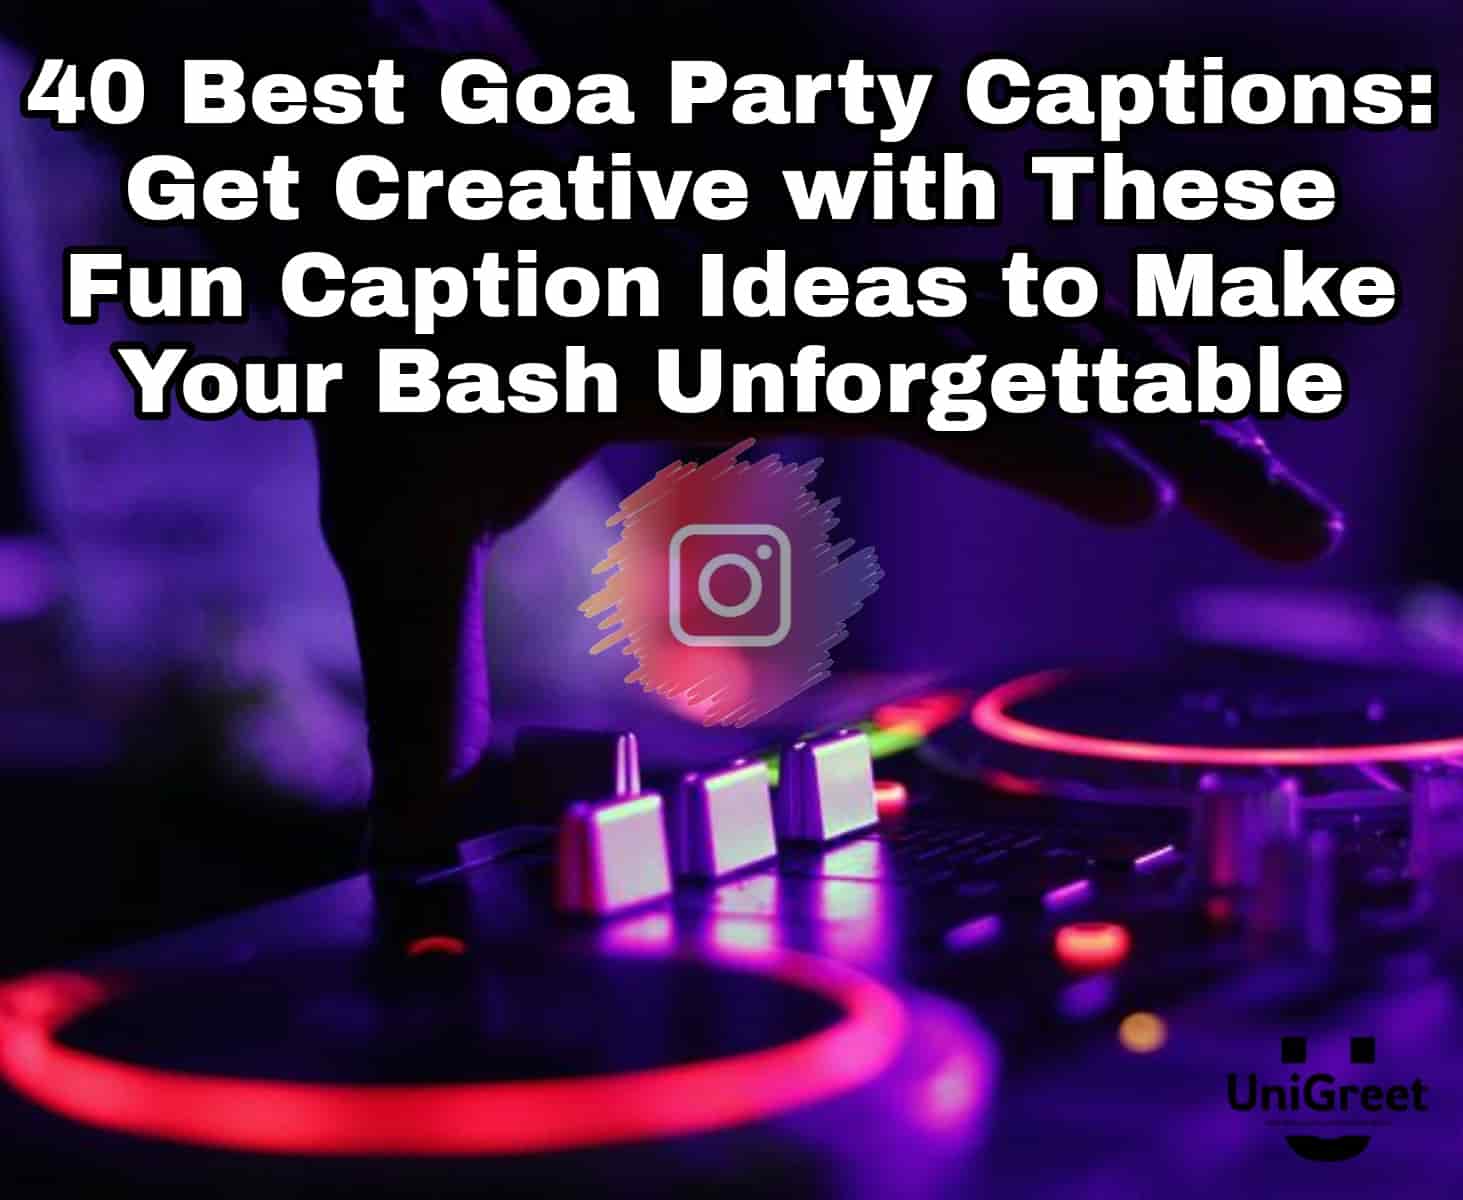 Best Goa Party Captions: Get Creative with These Fun Caption Ideas to Make Your Bash Unforgettable